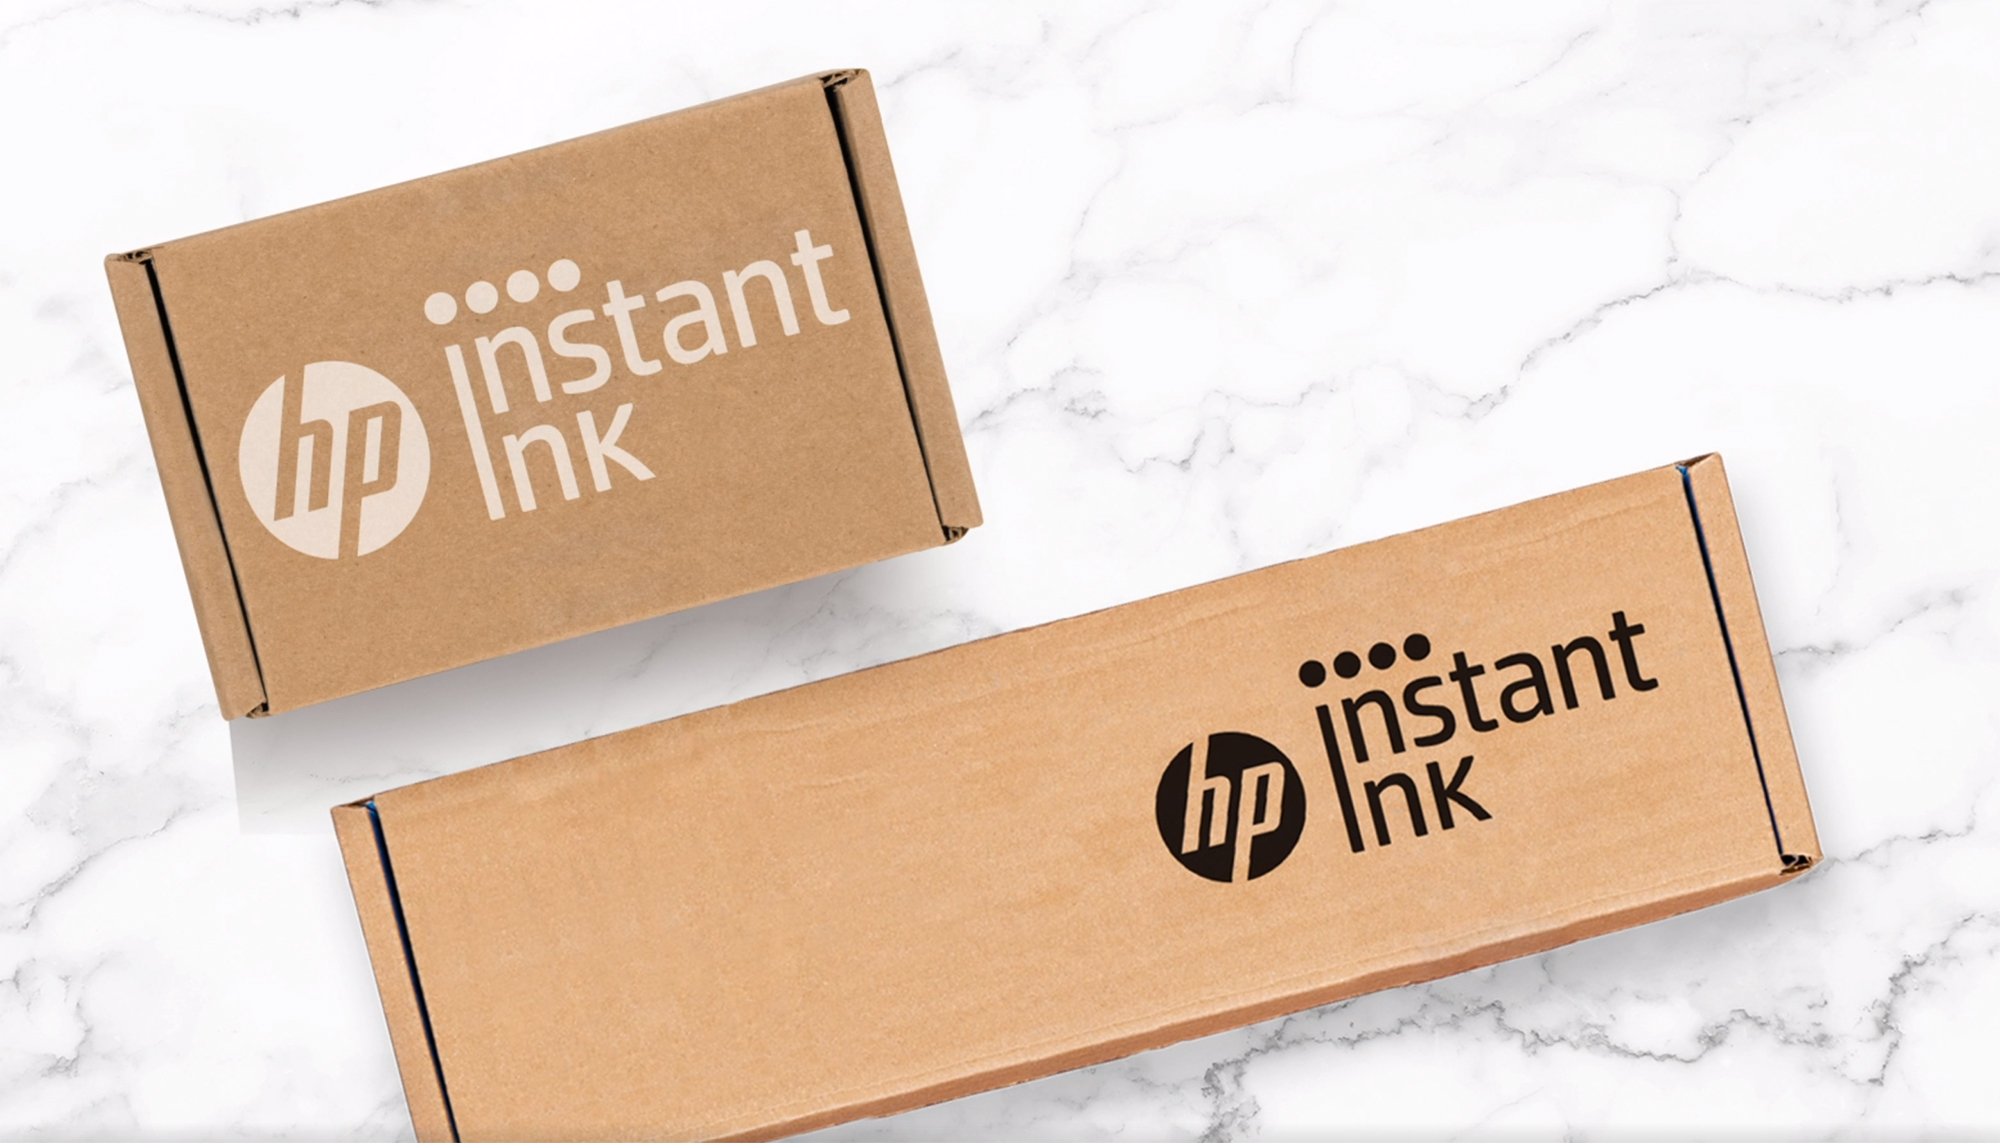 HP Instant Ink vs. Canon vs. Epson - are ink subscriptions worth it?